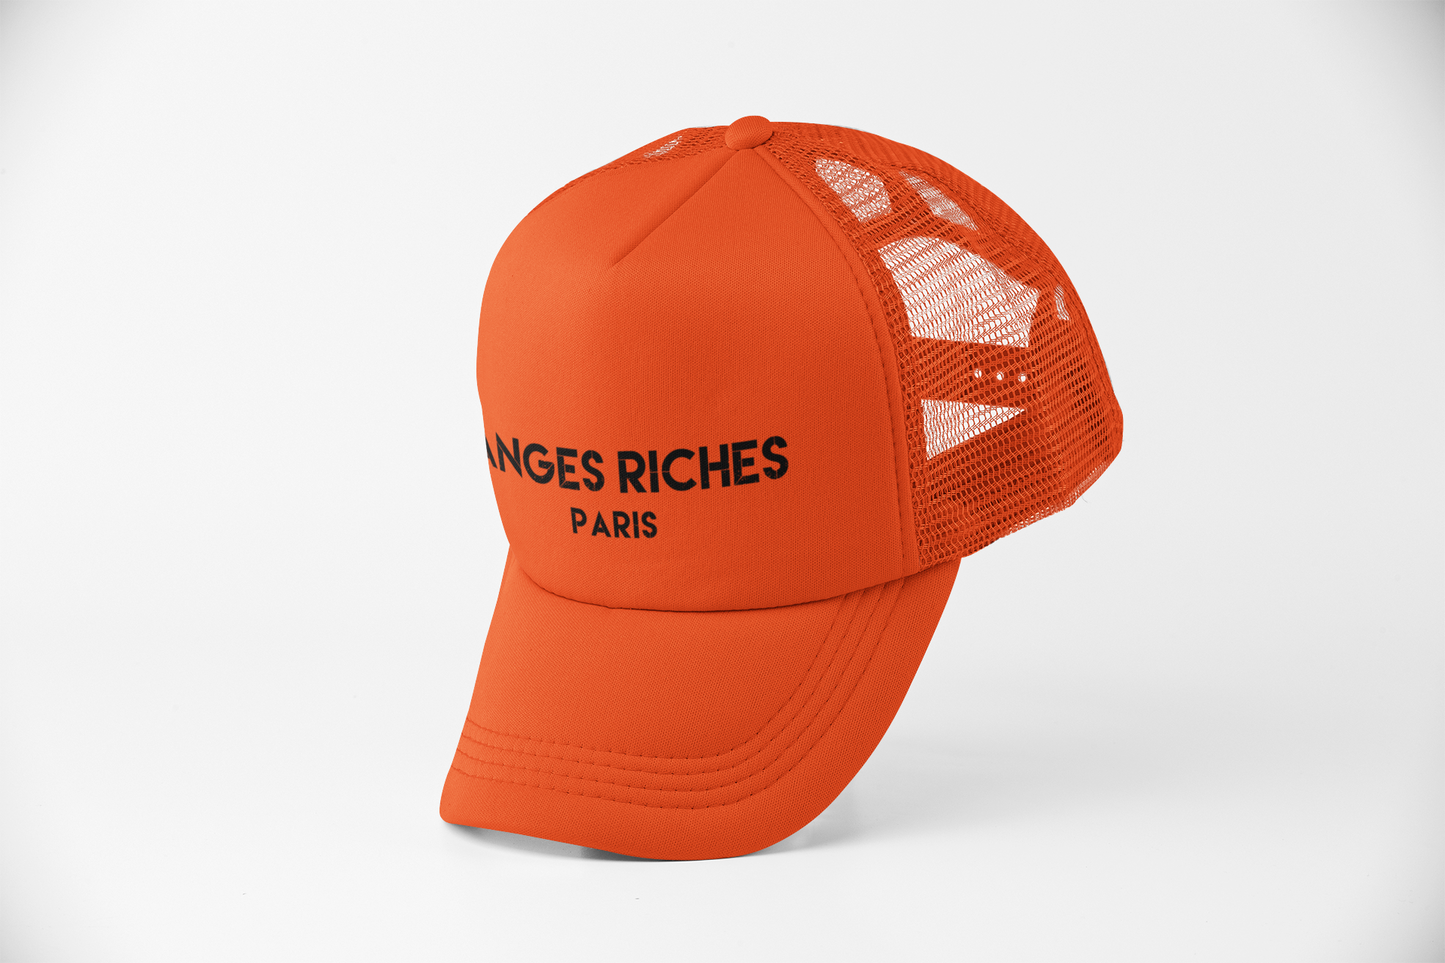 Anges Riches Signature Trucker Hat